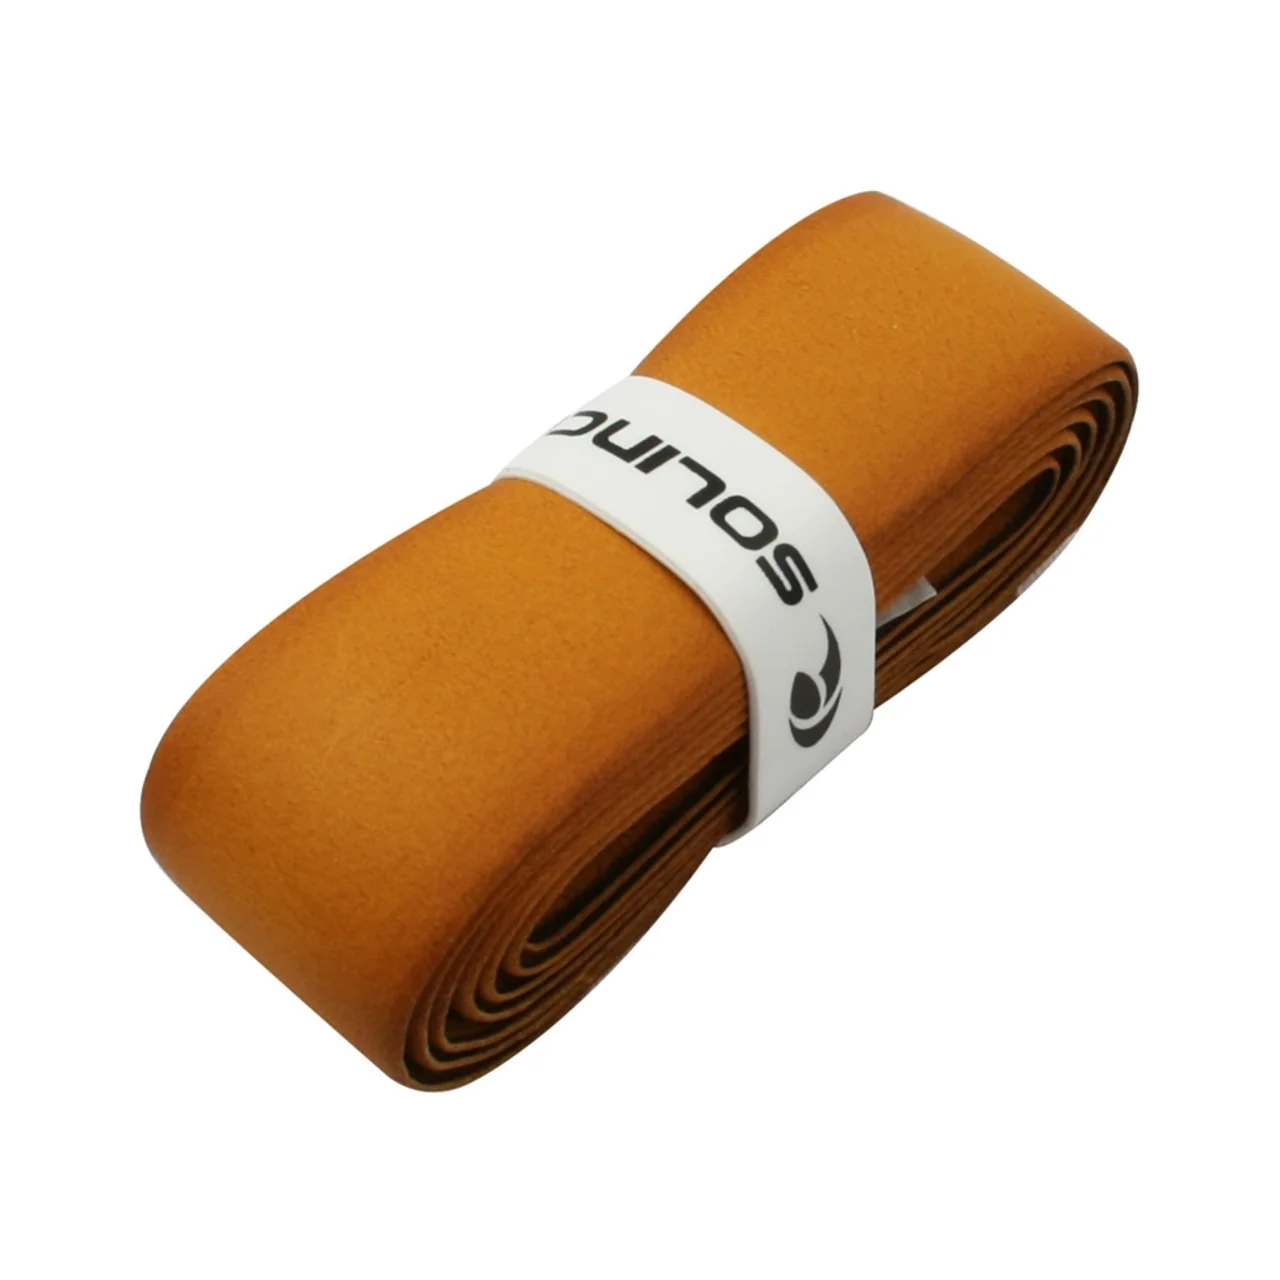 Solinco Leather Grip